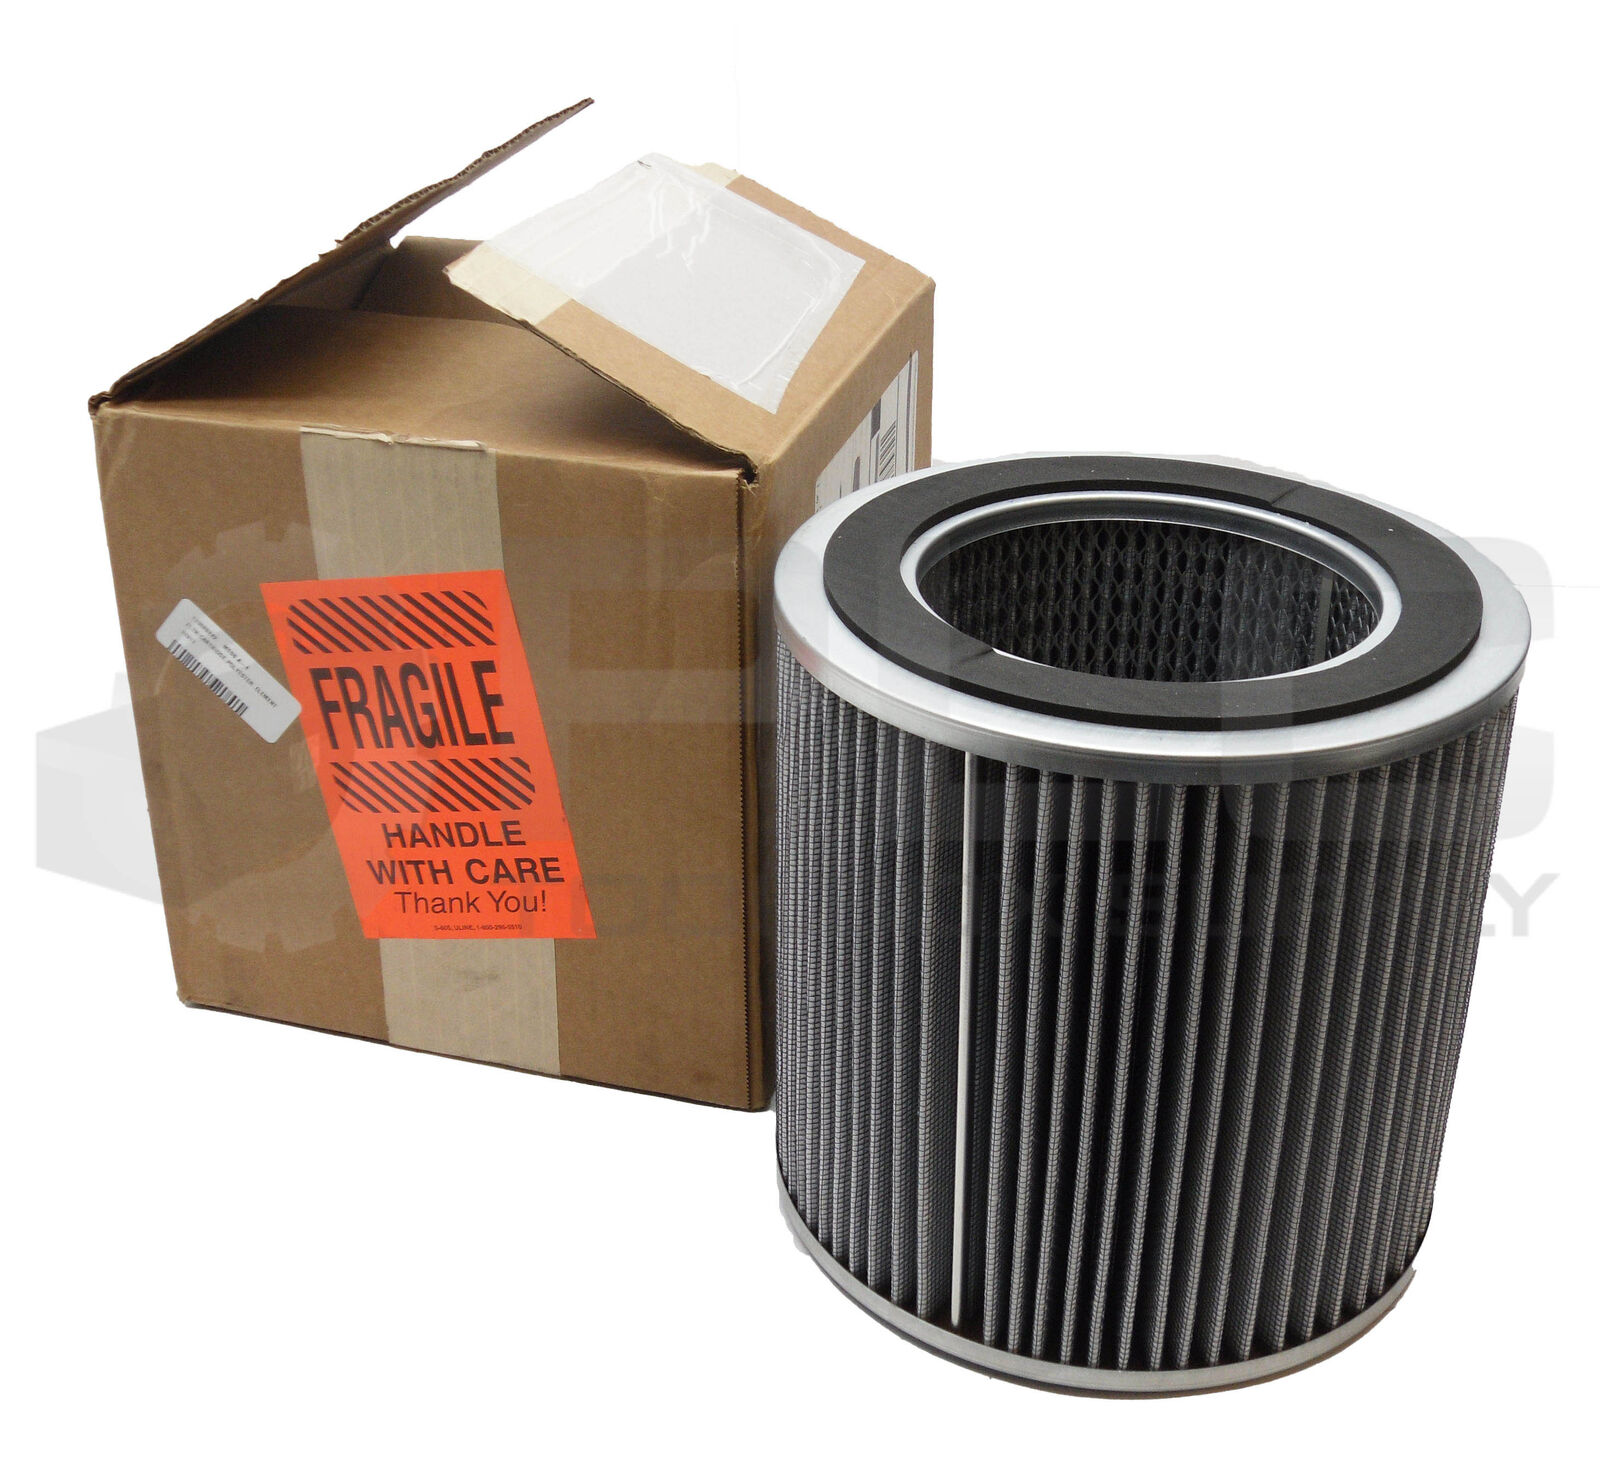 NEW SONIC AIR SYSTEMS 10317 POLYESTER ELEMENT FILTER CARTRIDGE 5 MICRON